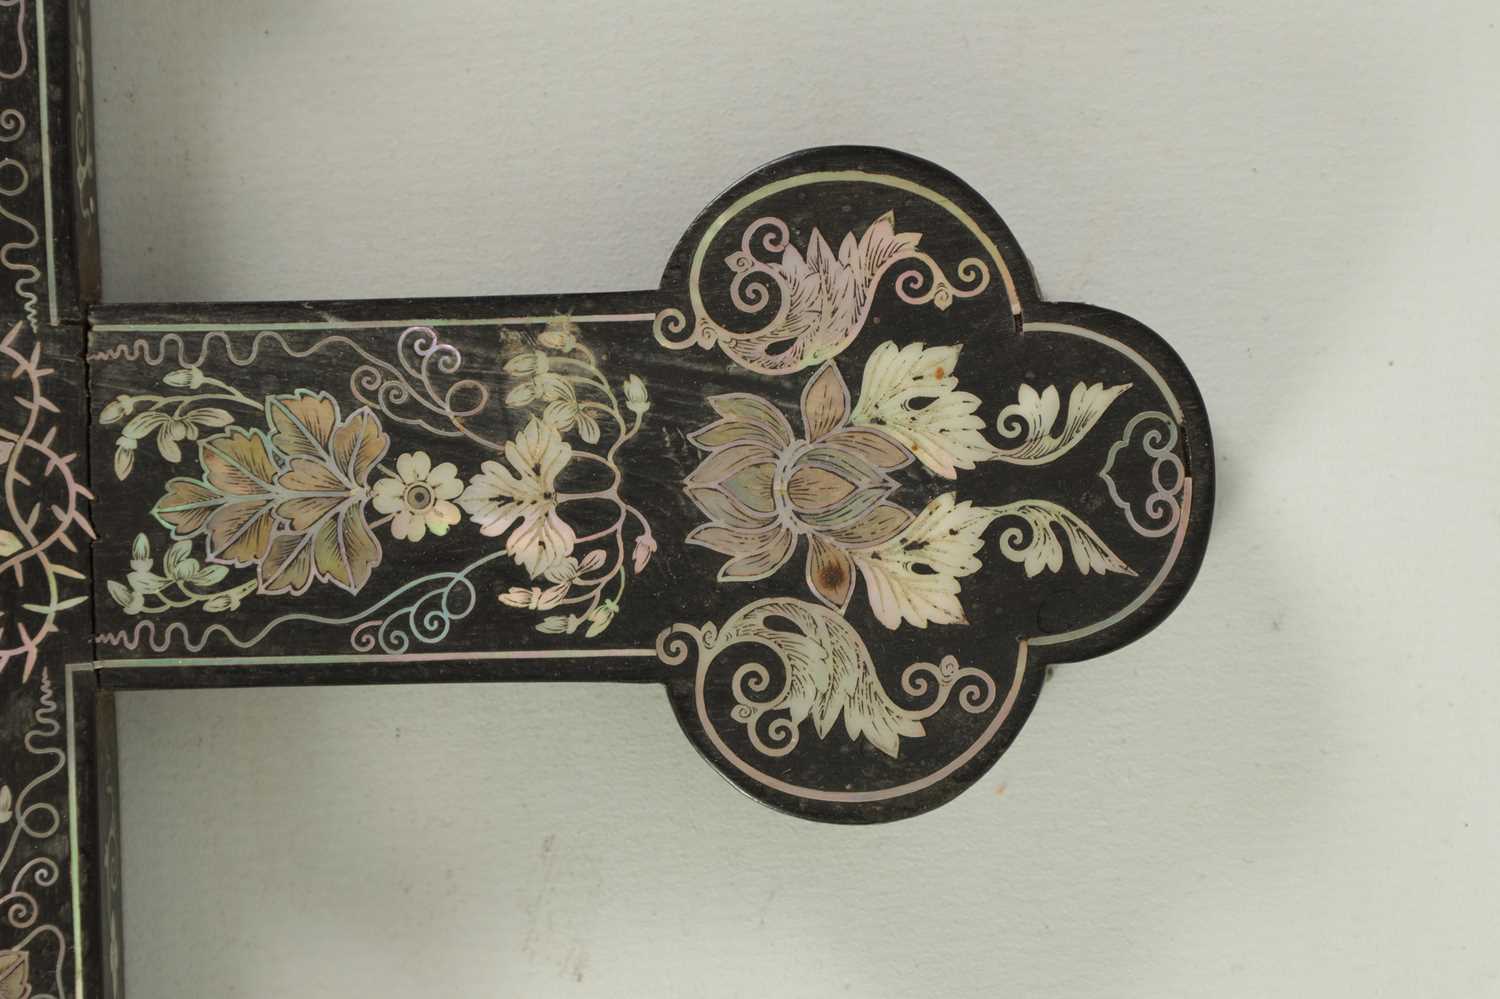 A FINE 18TH/19TH CENTURY CHINESE MOTHER OF PEARL INLAID HARDWOOD APOSTLE CROSS - Image 5 of 11